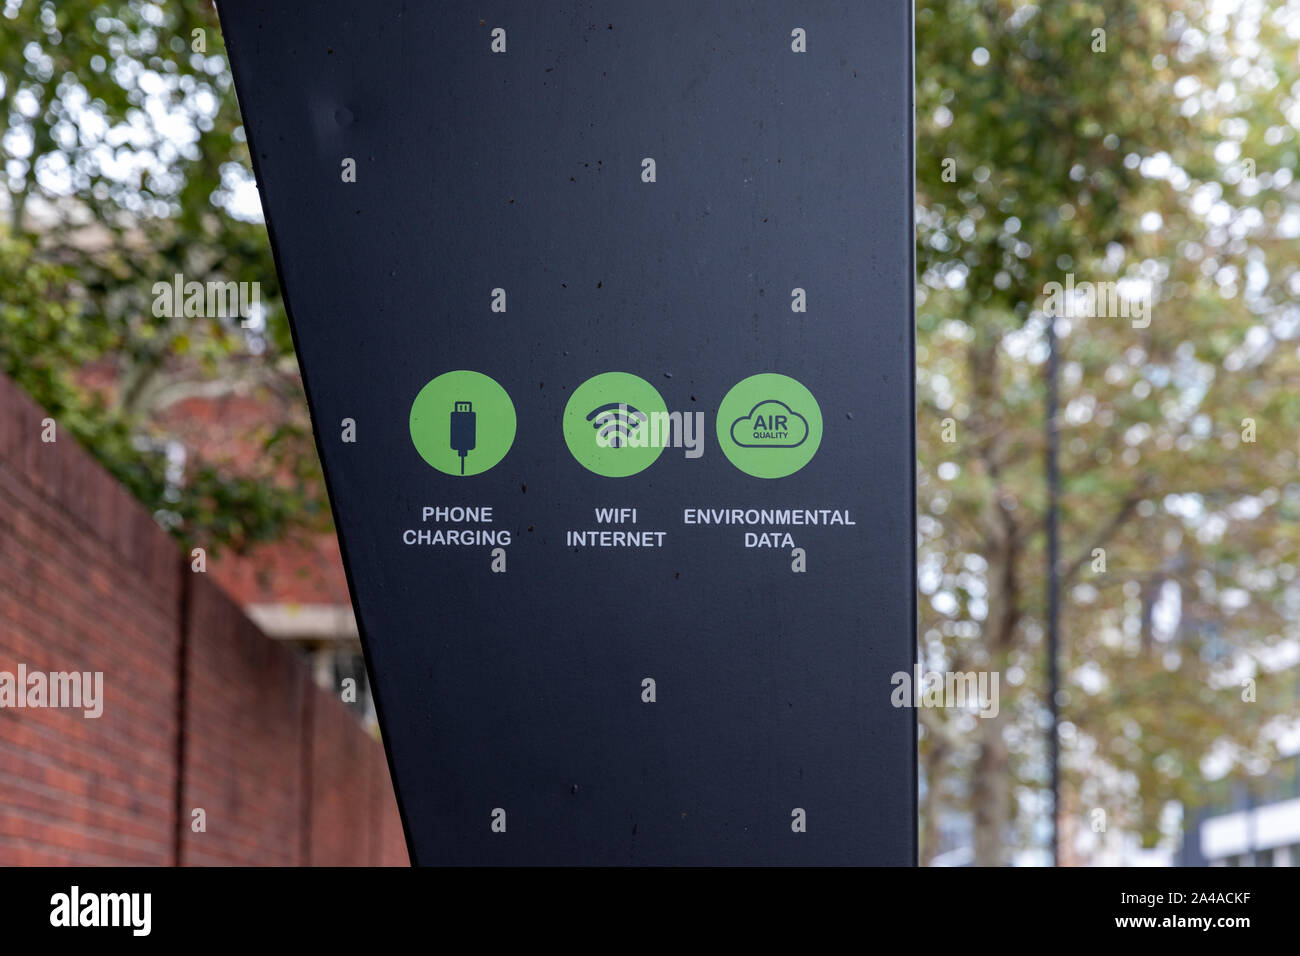 A Duolingo solar powered smart bench sign displaying phone charging, wifi internet and environmental data services on a city street in London. Stock Photo